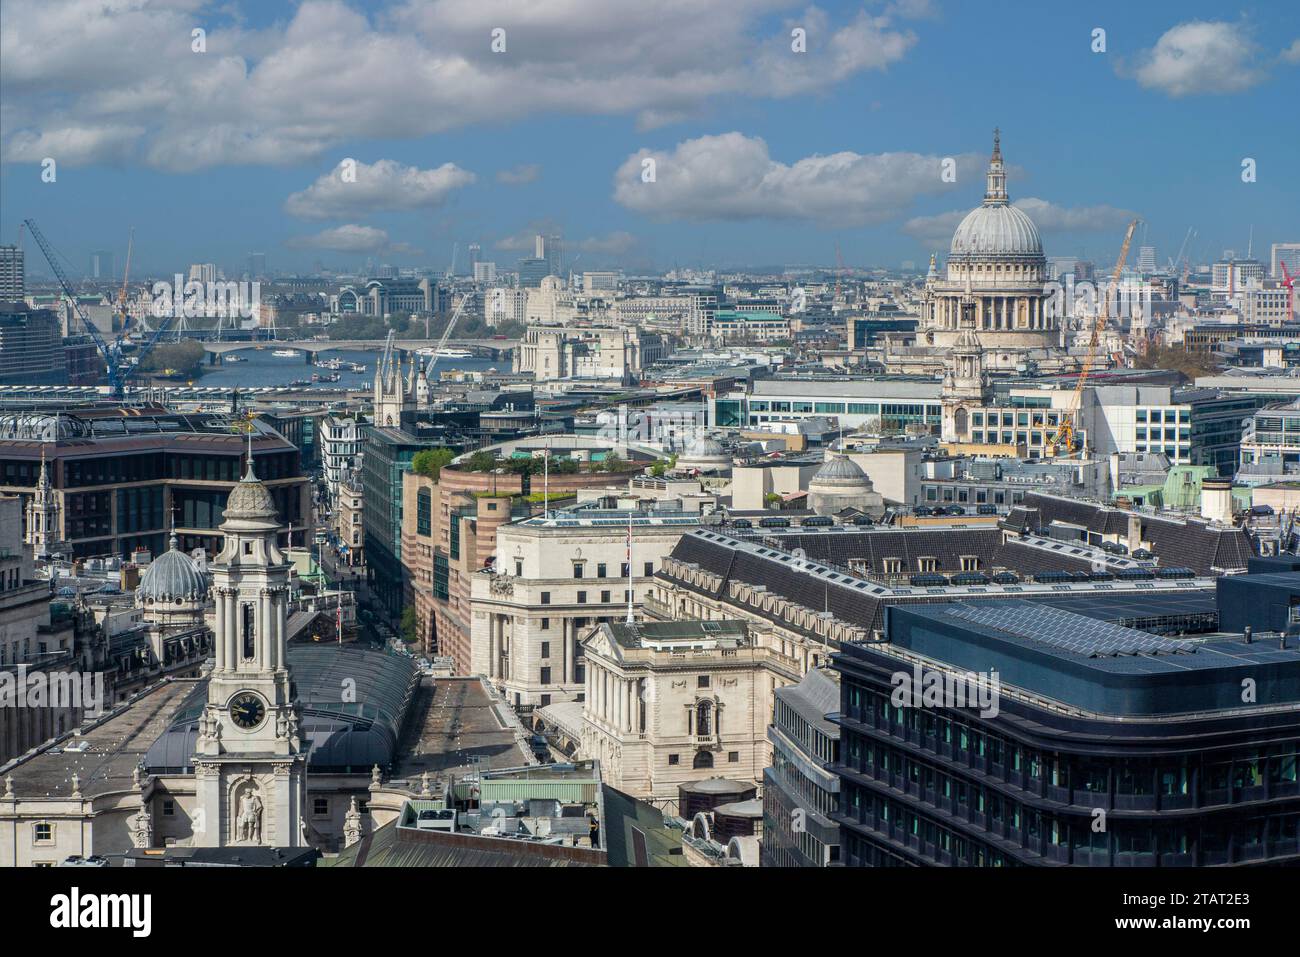 An unusual shot of the River Thames with the West End and St Paul's Cathedral in the distance Stock Photo